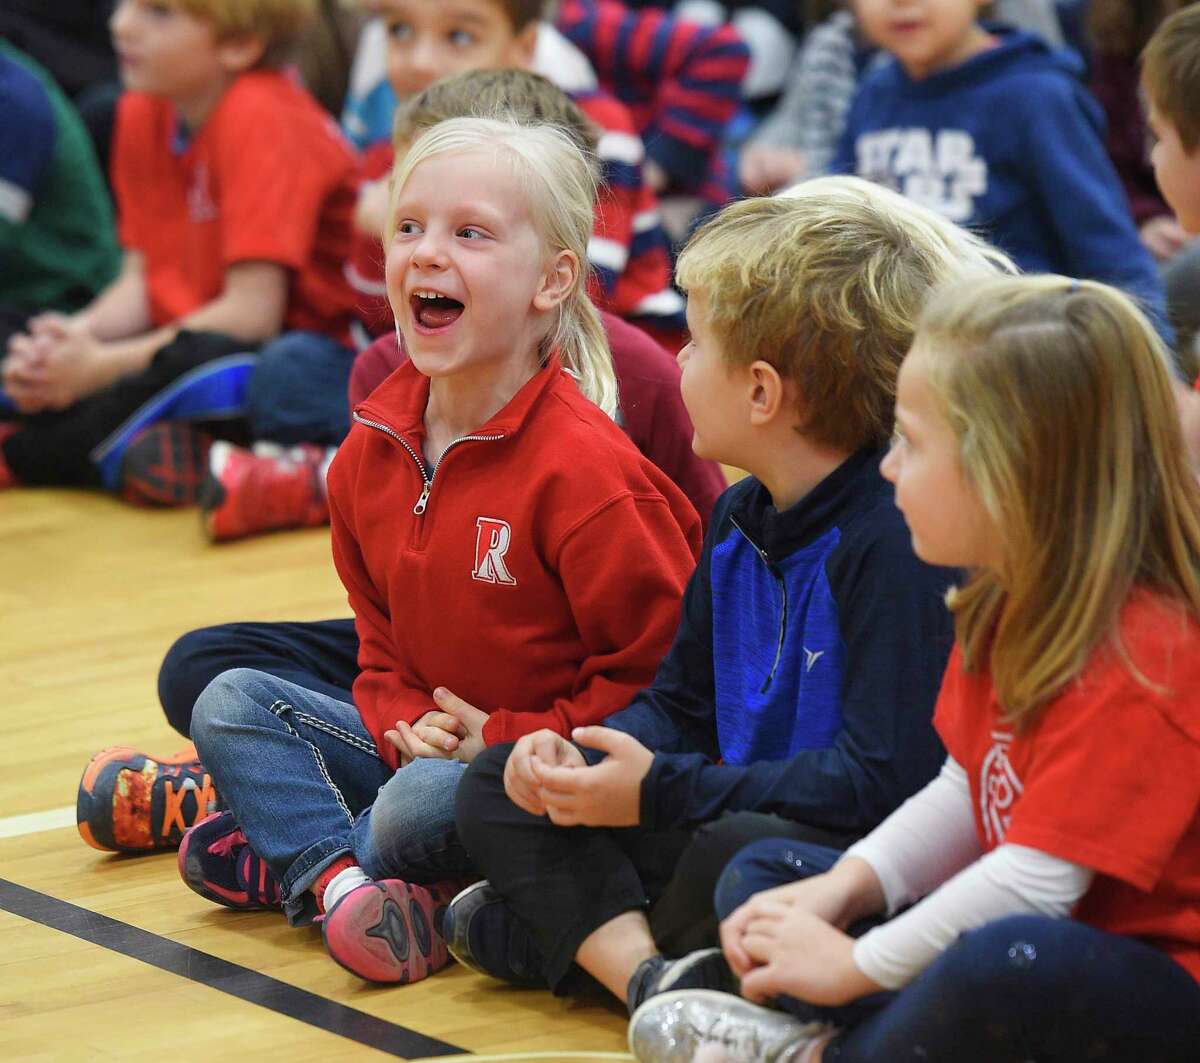 Kindergartner Rose Mund yells "thank you for your service" to veterans in attendance at the Veterans Day ceremony at Riverside School in the Riverside section of Greenwich, Conn. Friday, Nov. 9, 2018.